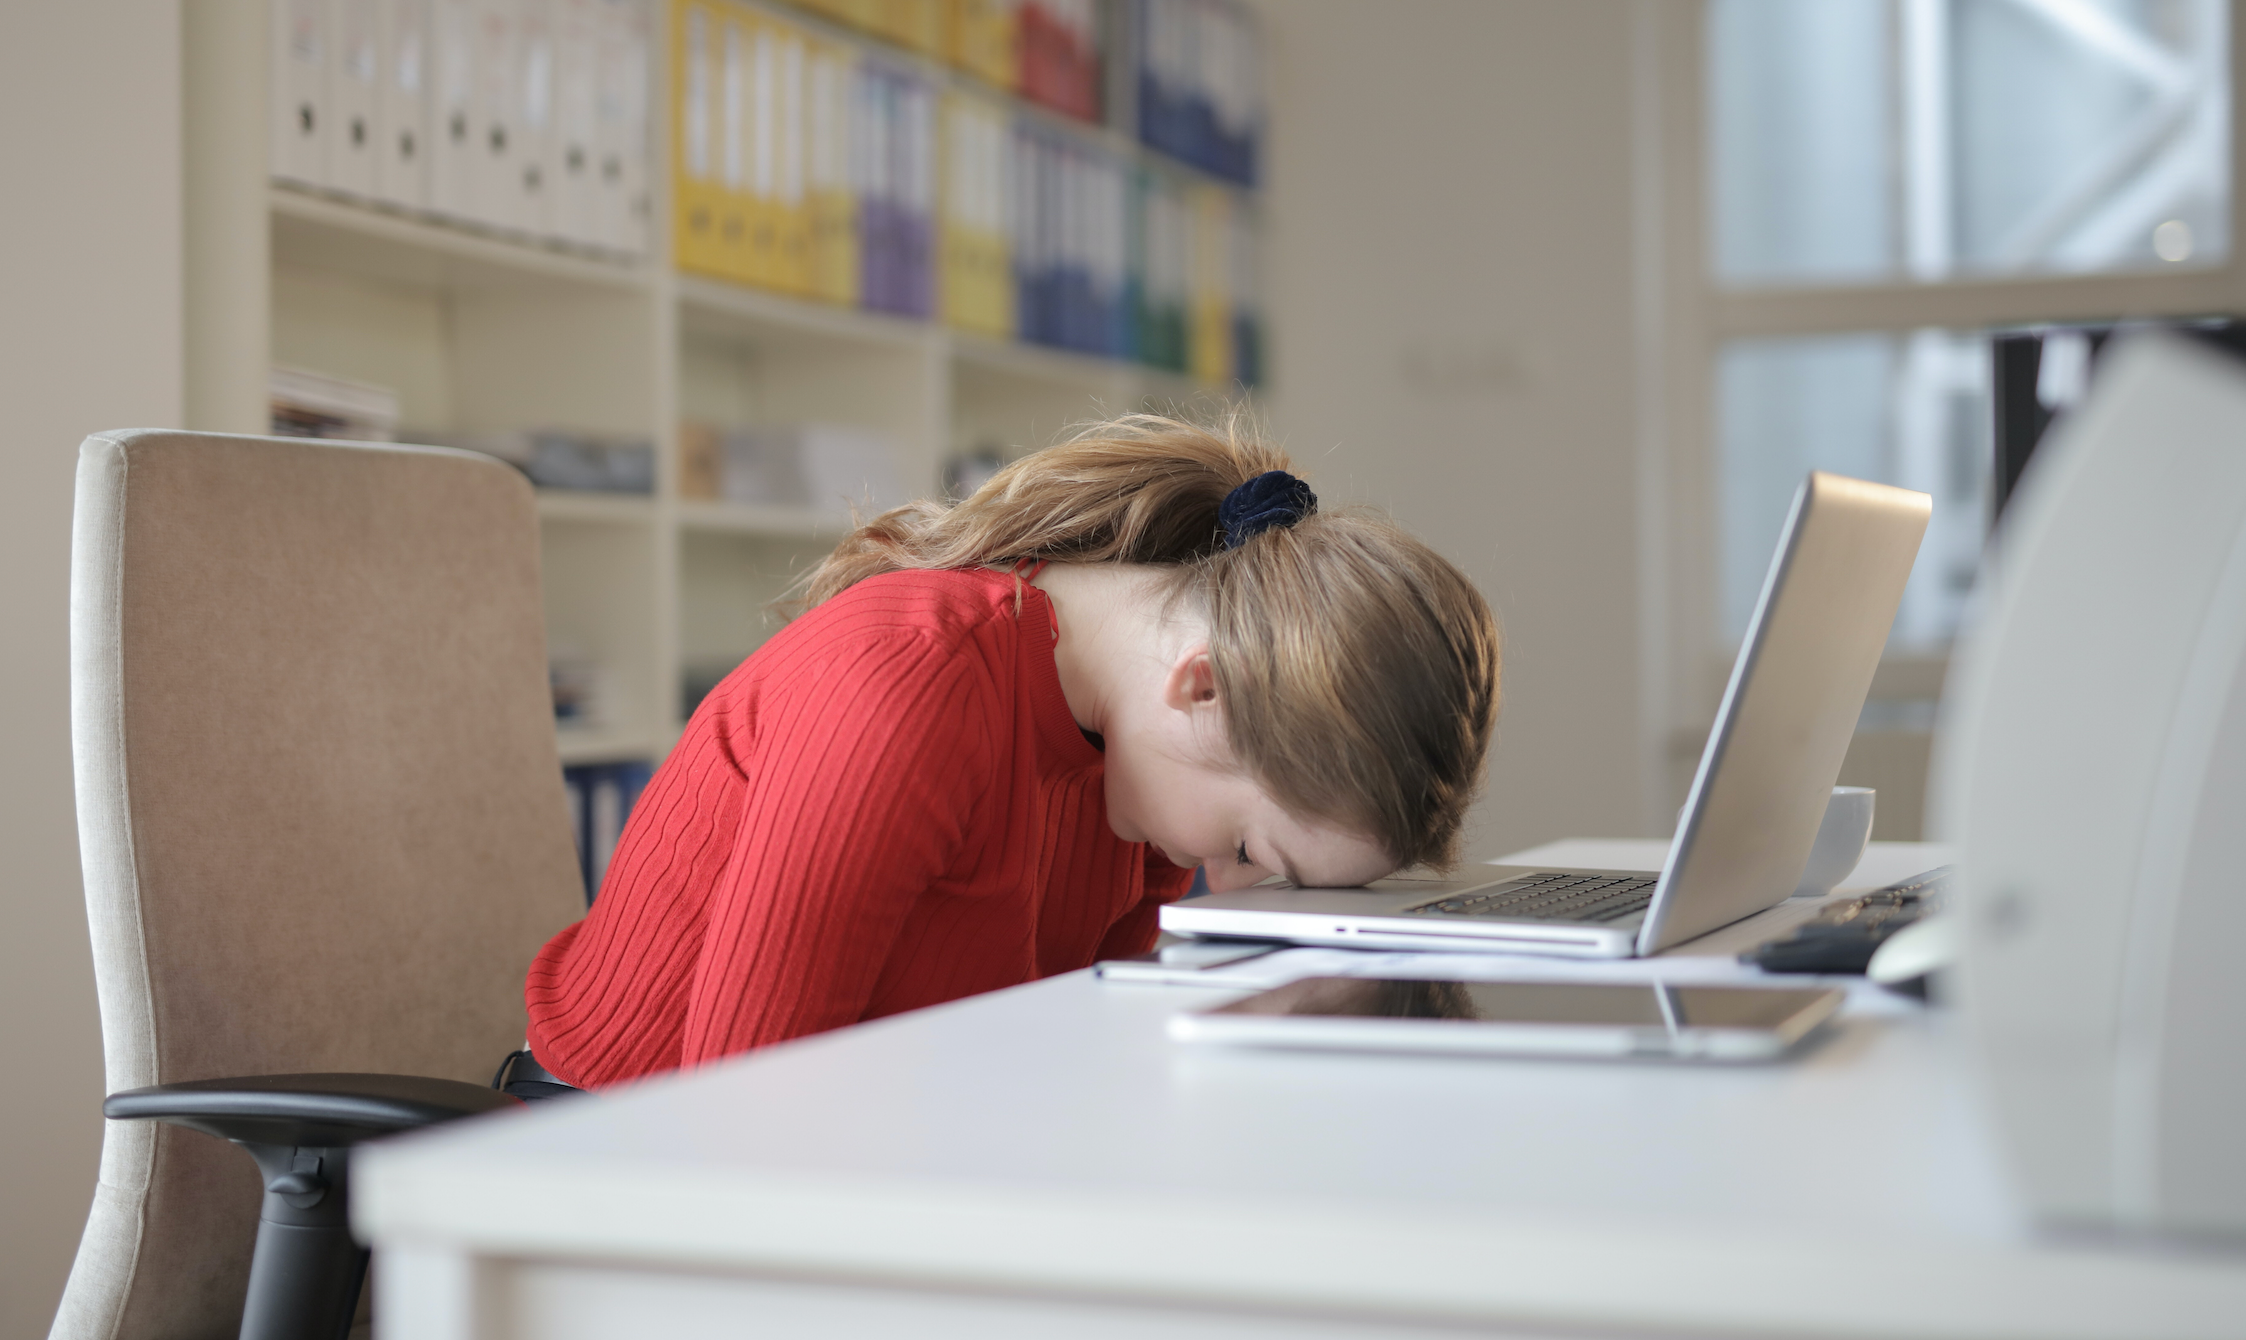 7 Ways To Fight Fatigue For Better Health